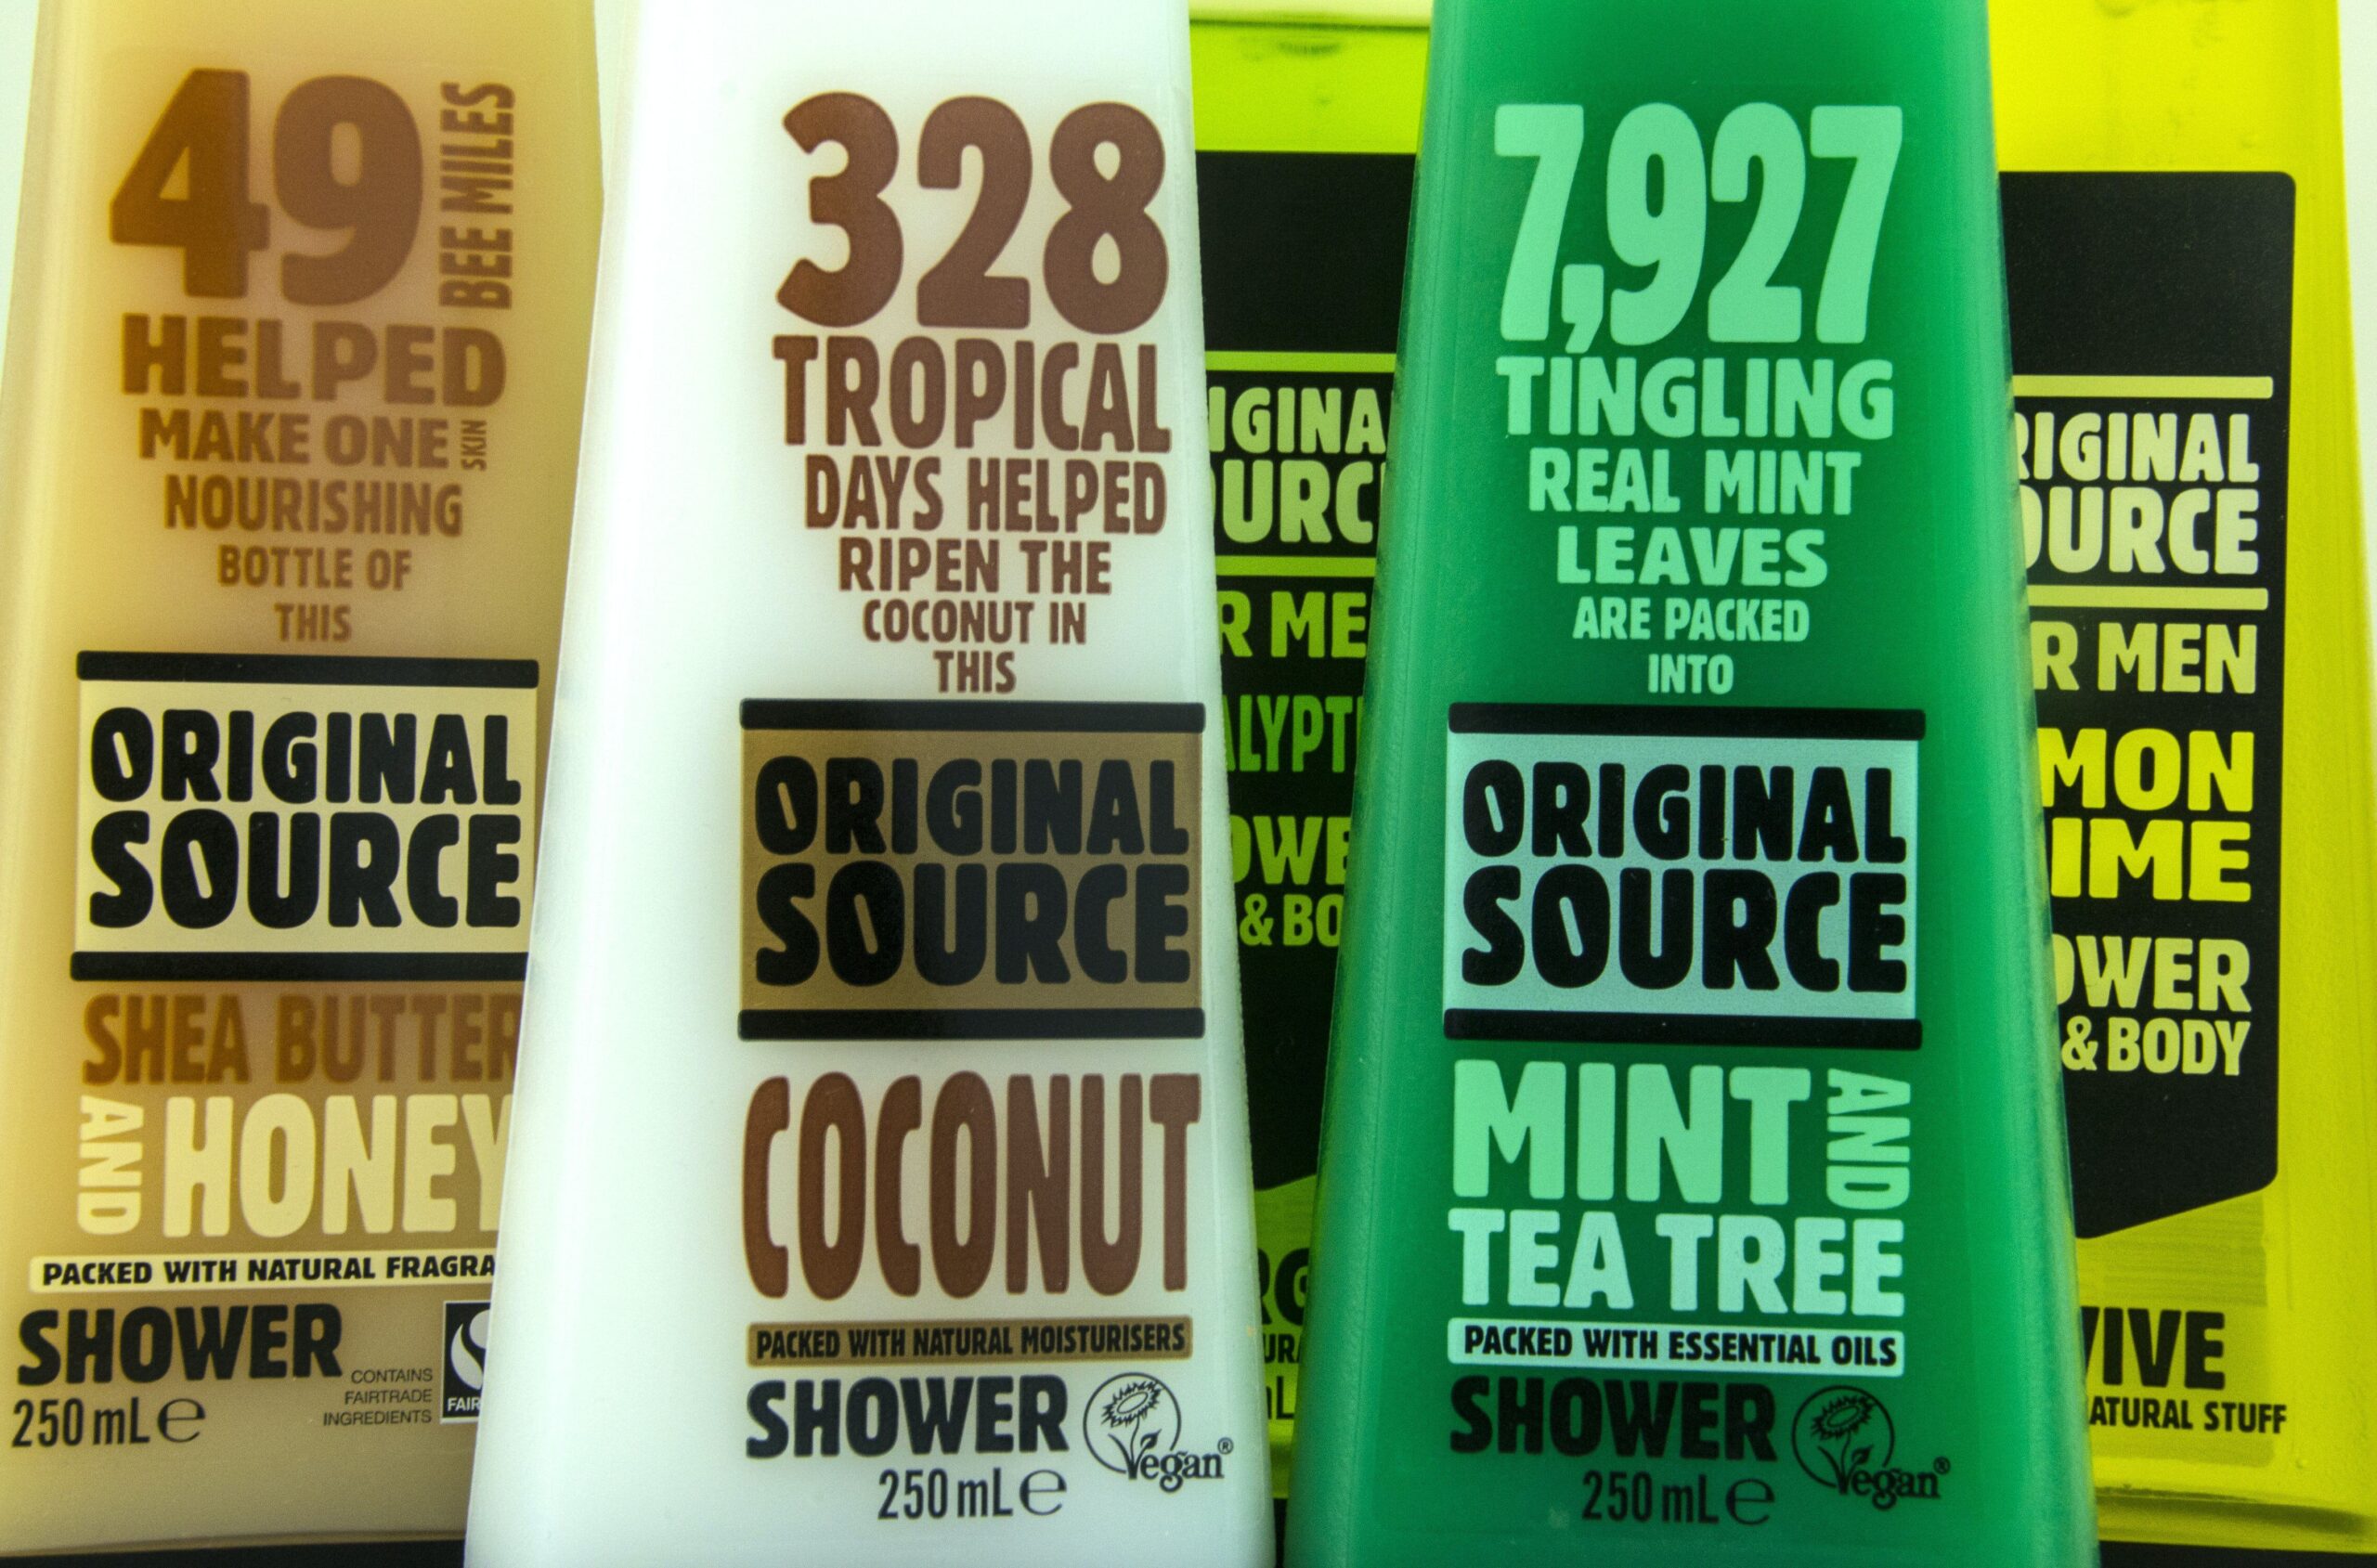 PZ Cussons to Sell St Tropez, May Exit Africa - Fashnfly